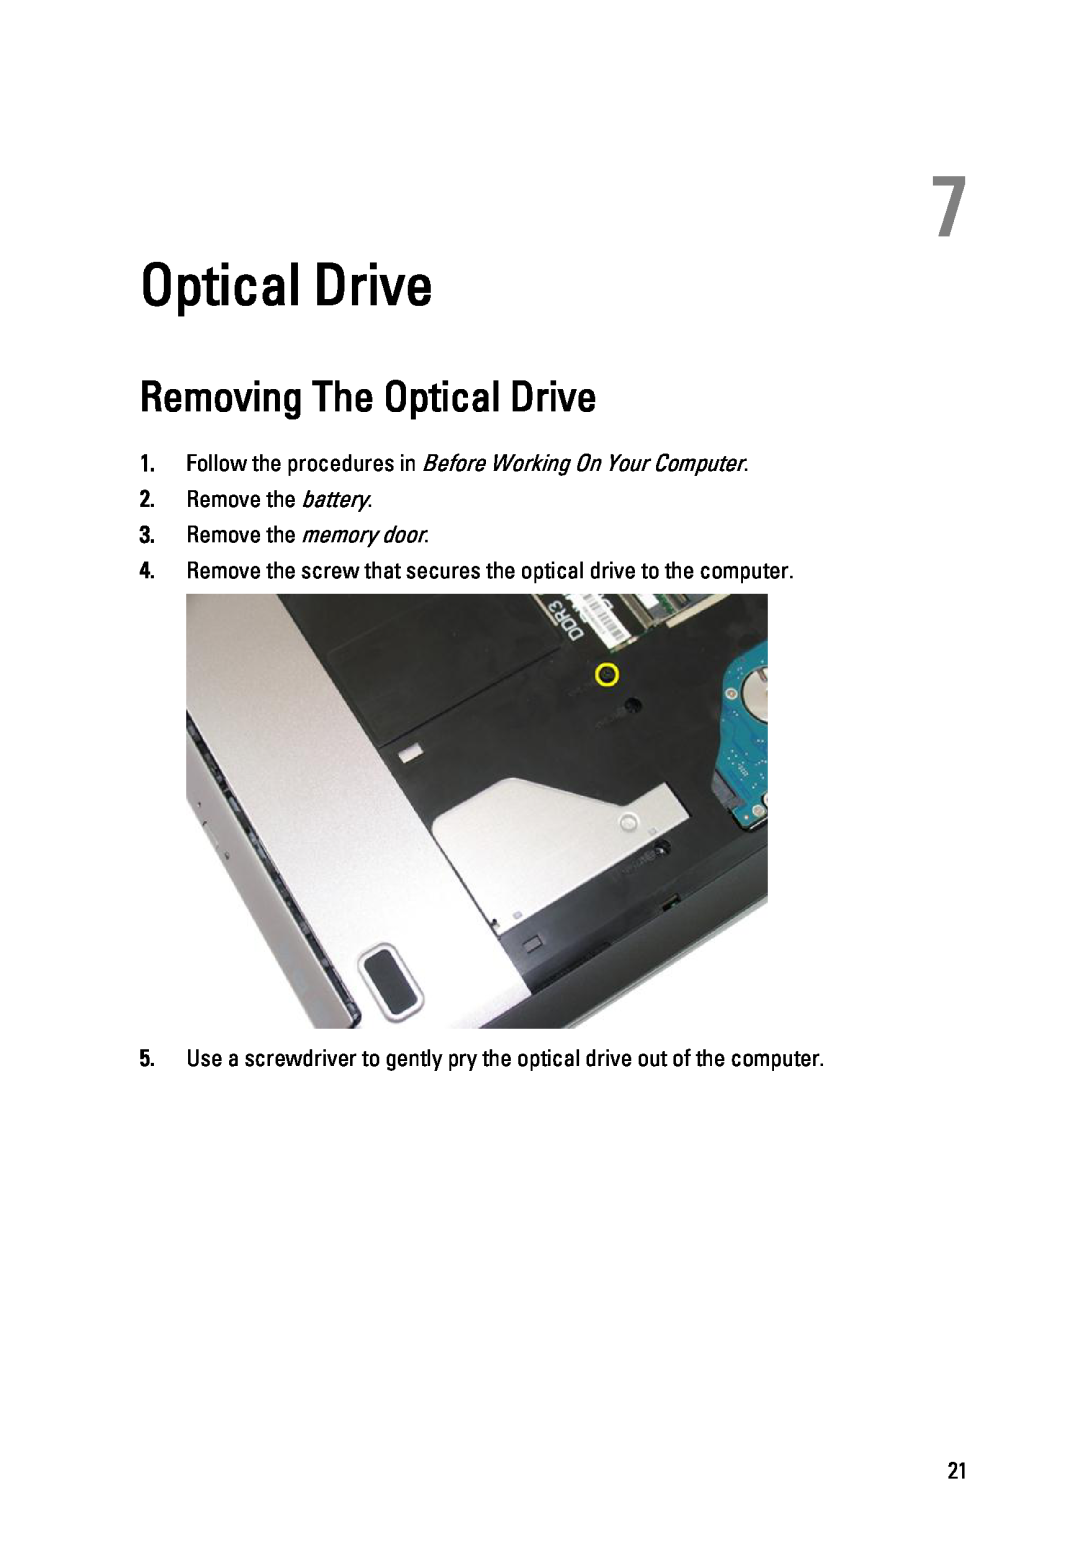 Dell 3450 owner manual Removing The Optical Drive, Remove the screw that secures the optical drive to the computer 